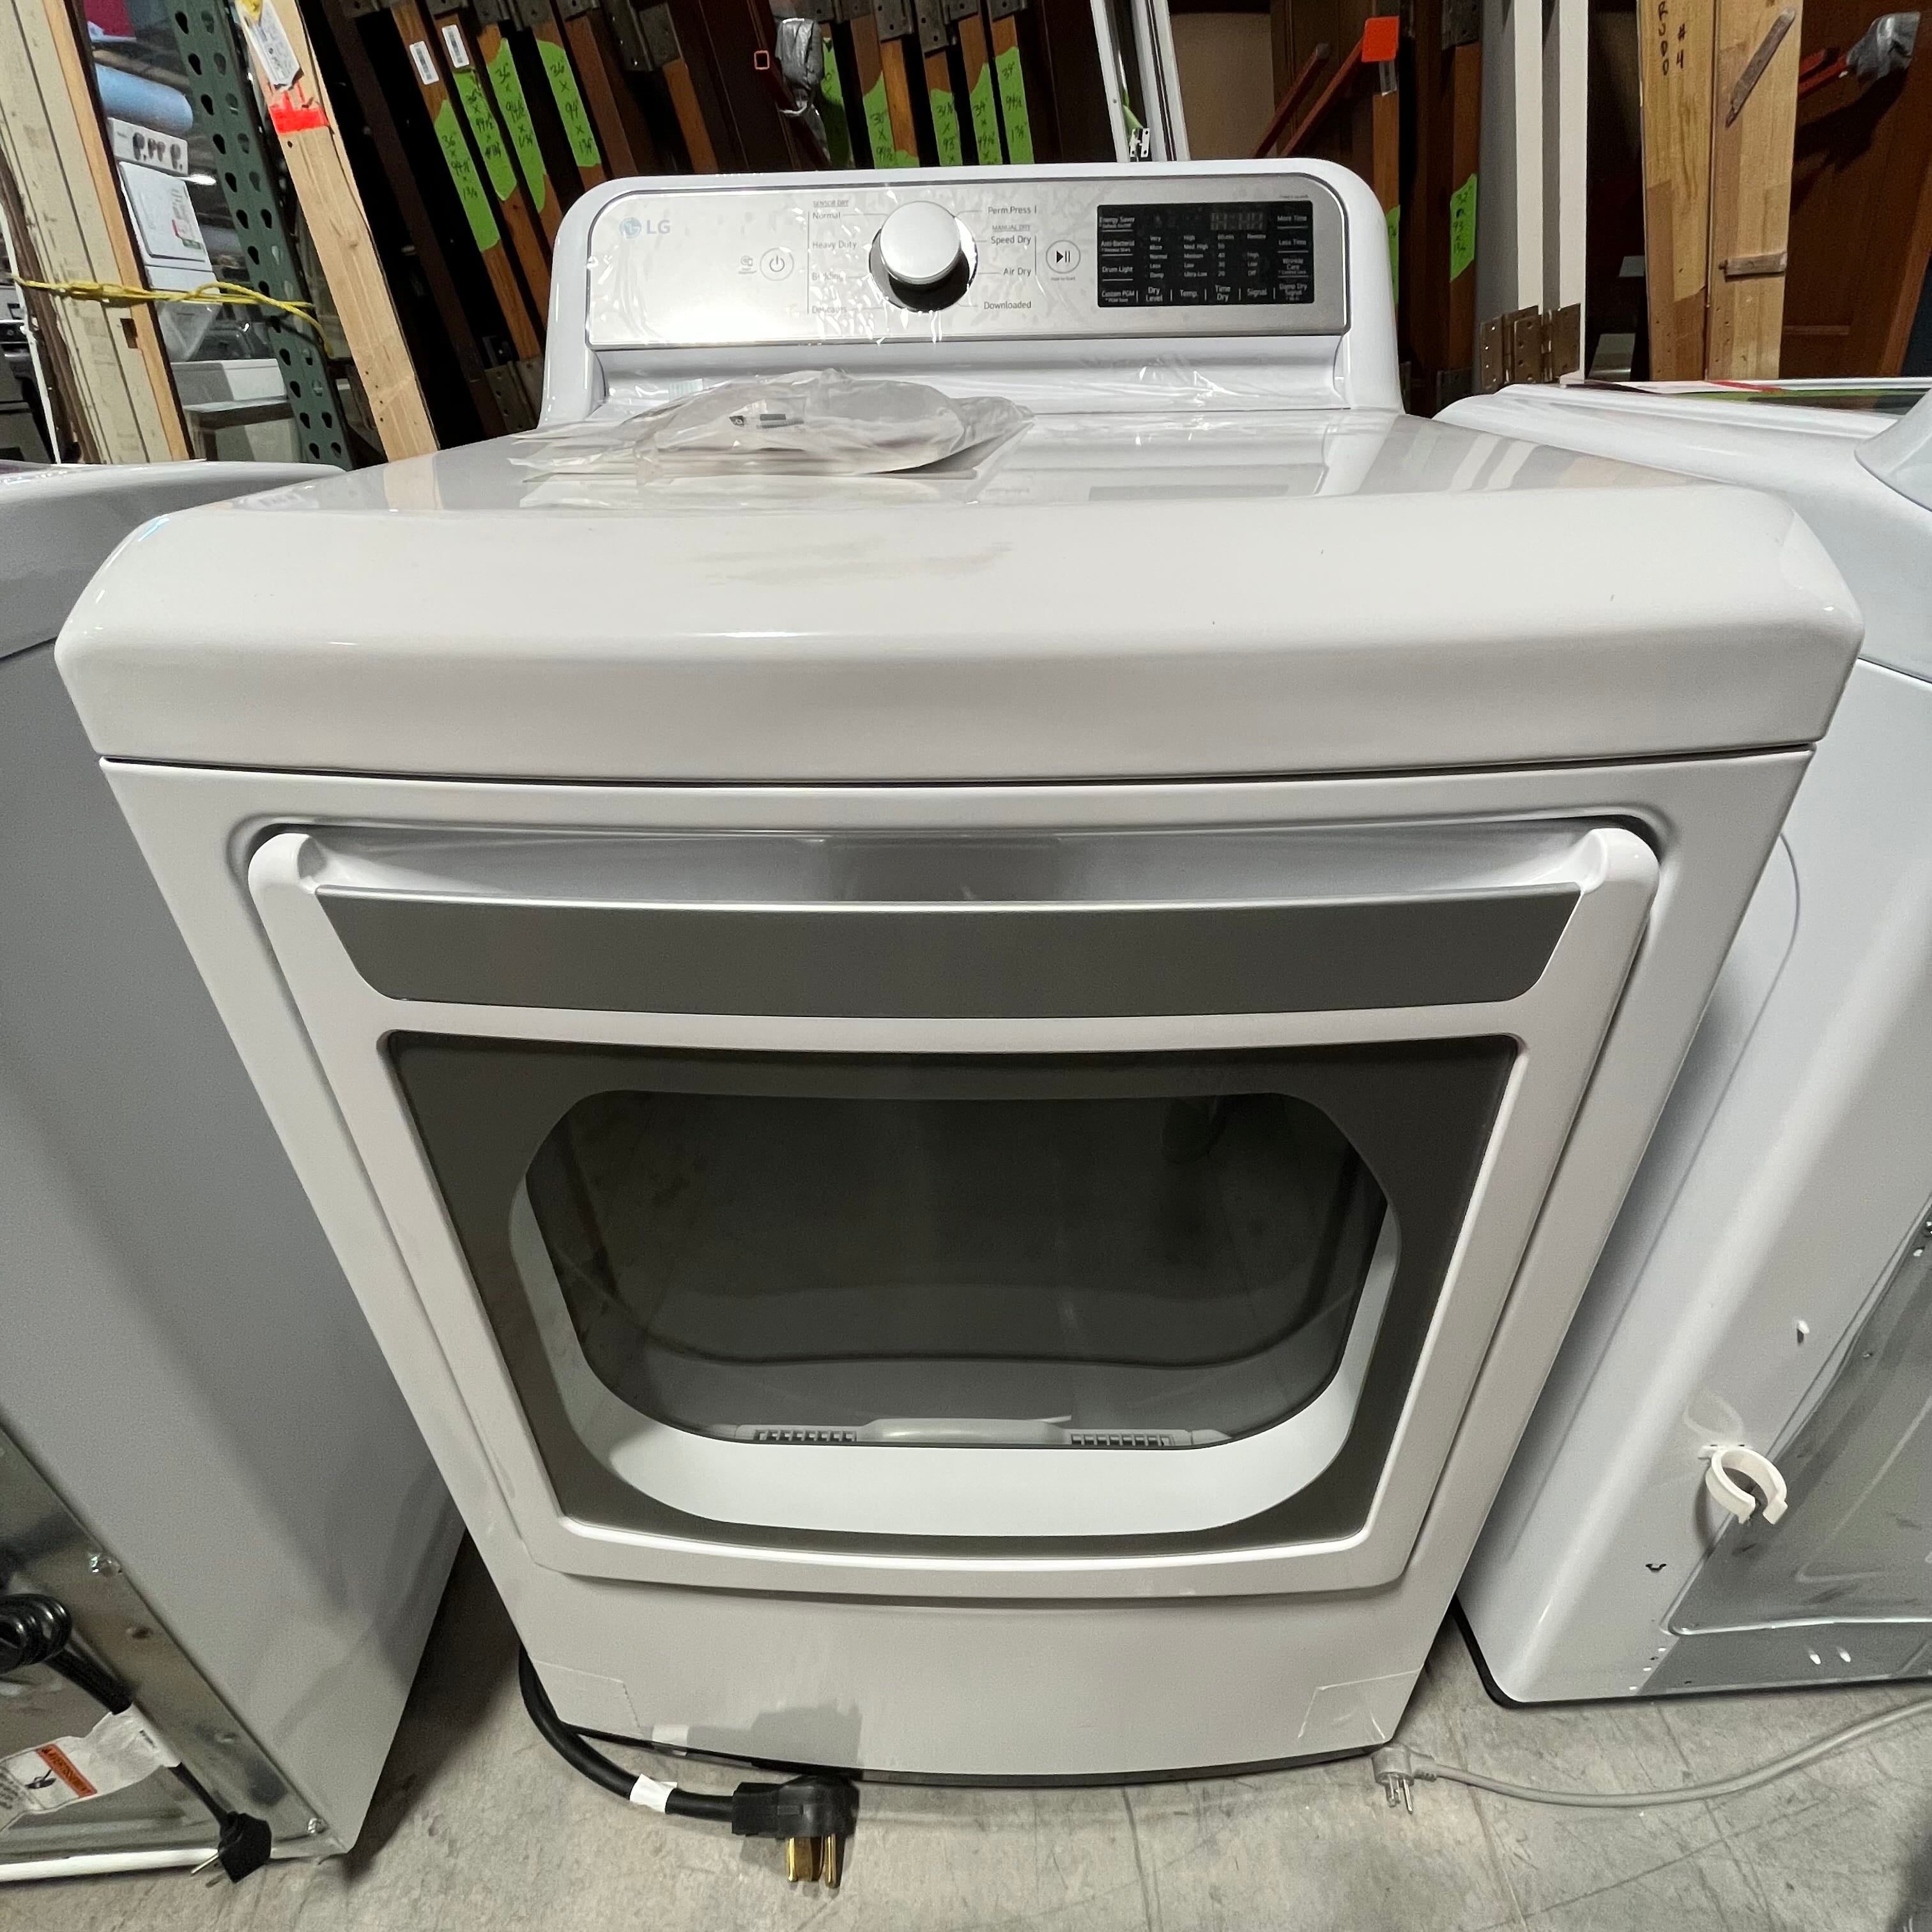 F3823 LG Electric Large Capacity White Dryer